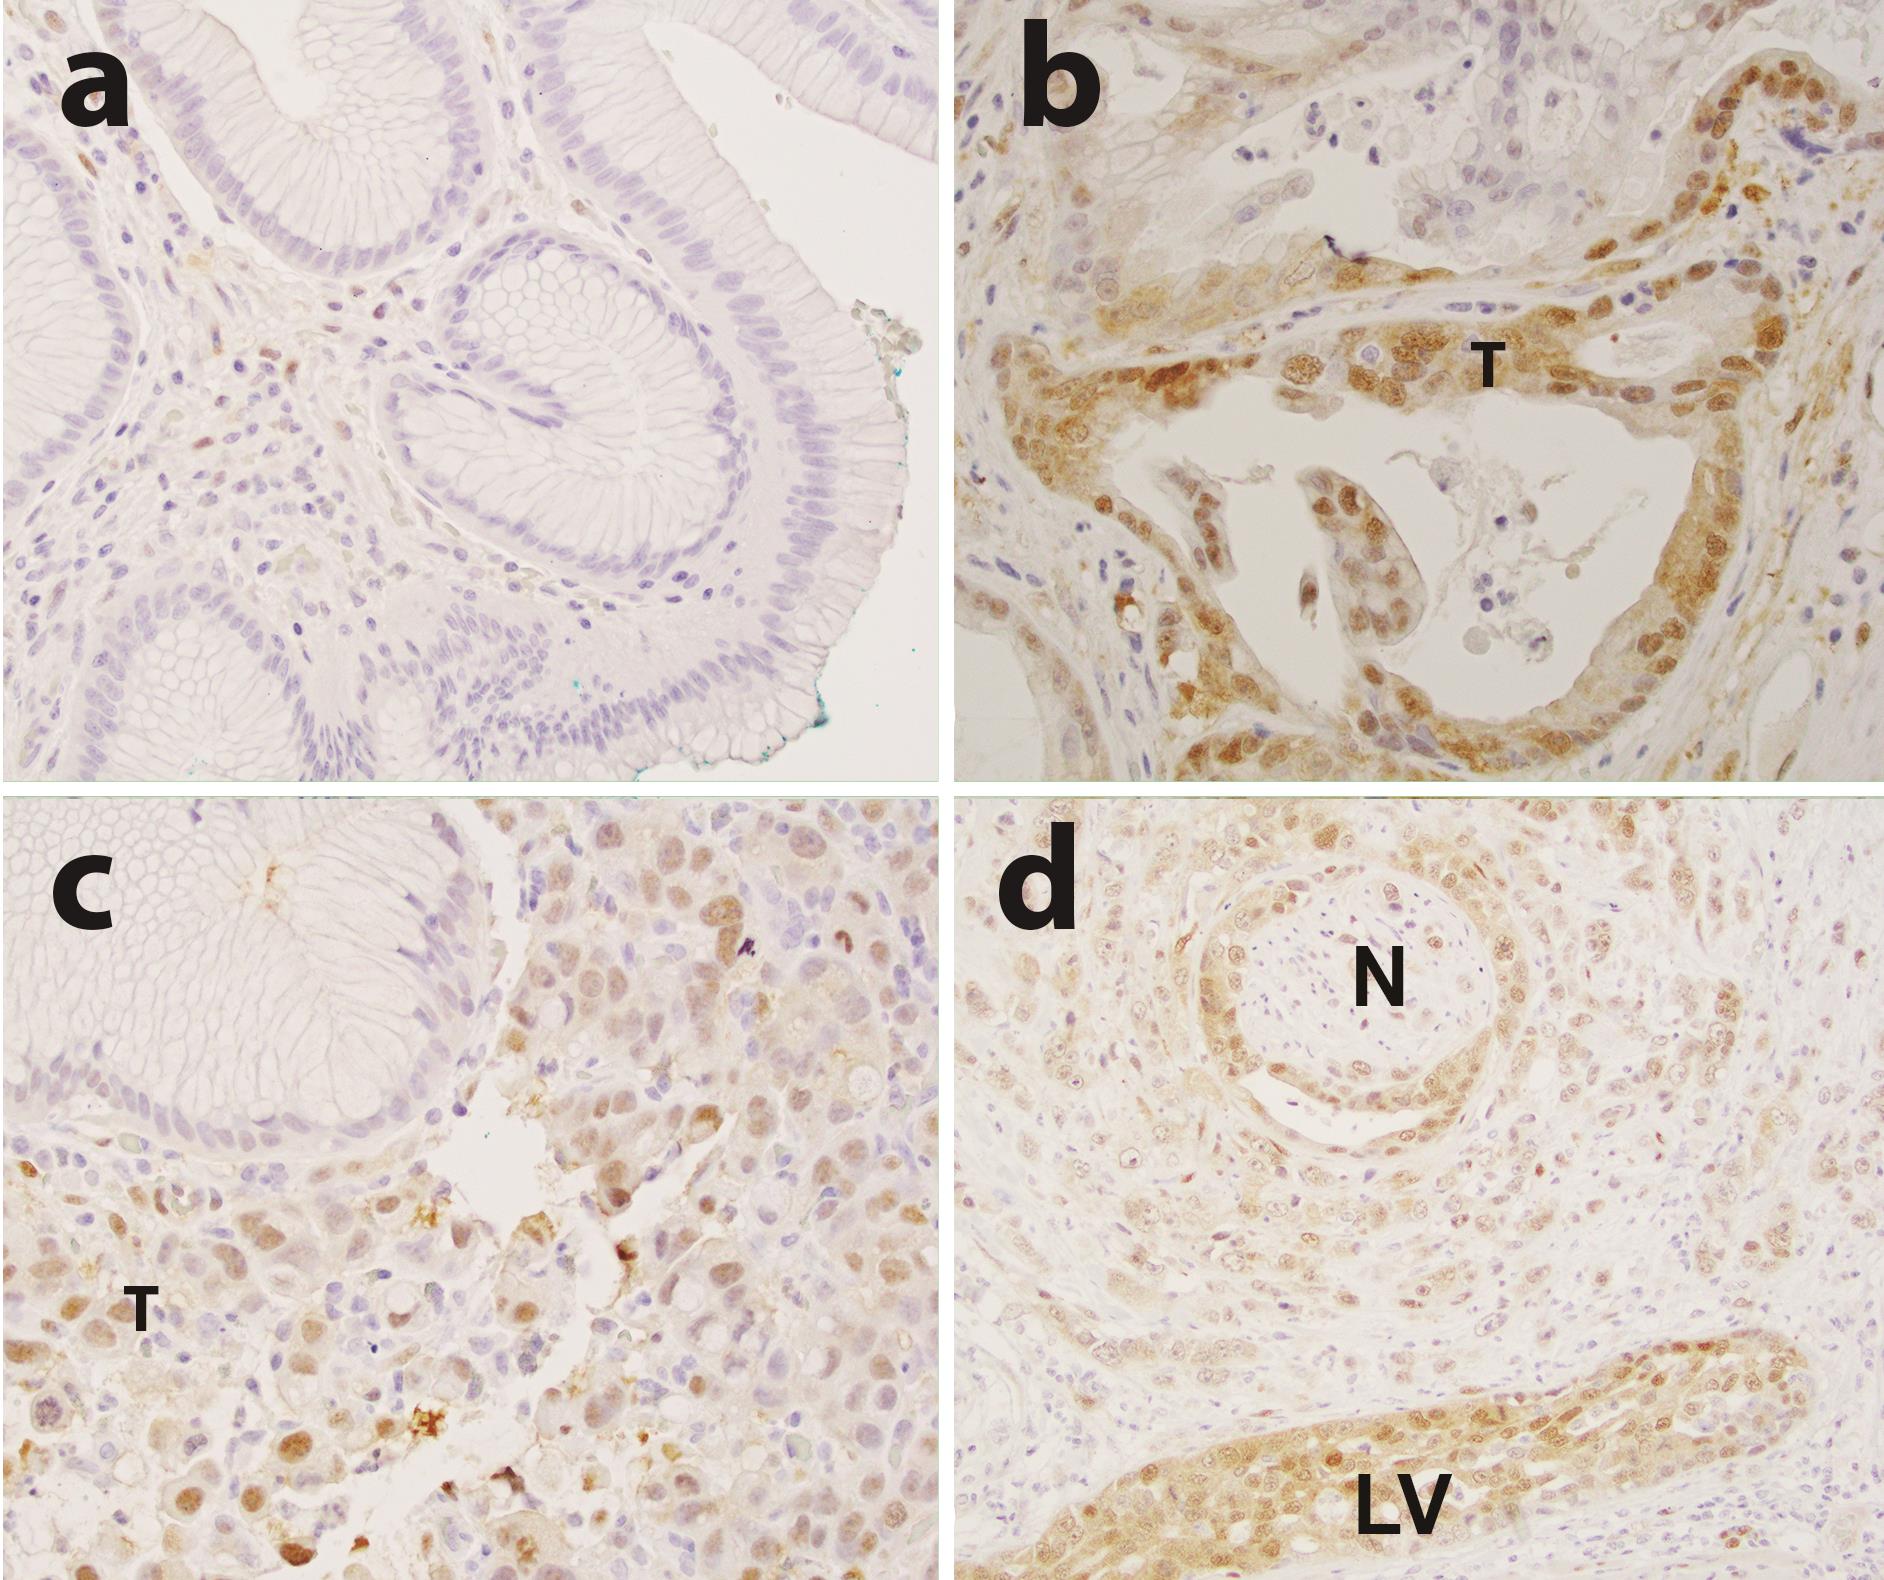 YAP1 immuno-reactivity in a case of esophageal adenocarcinoma.